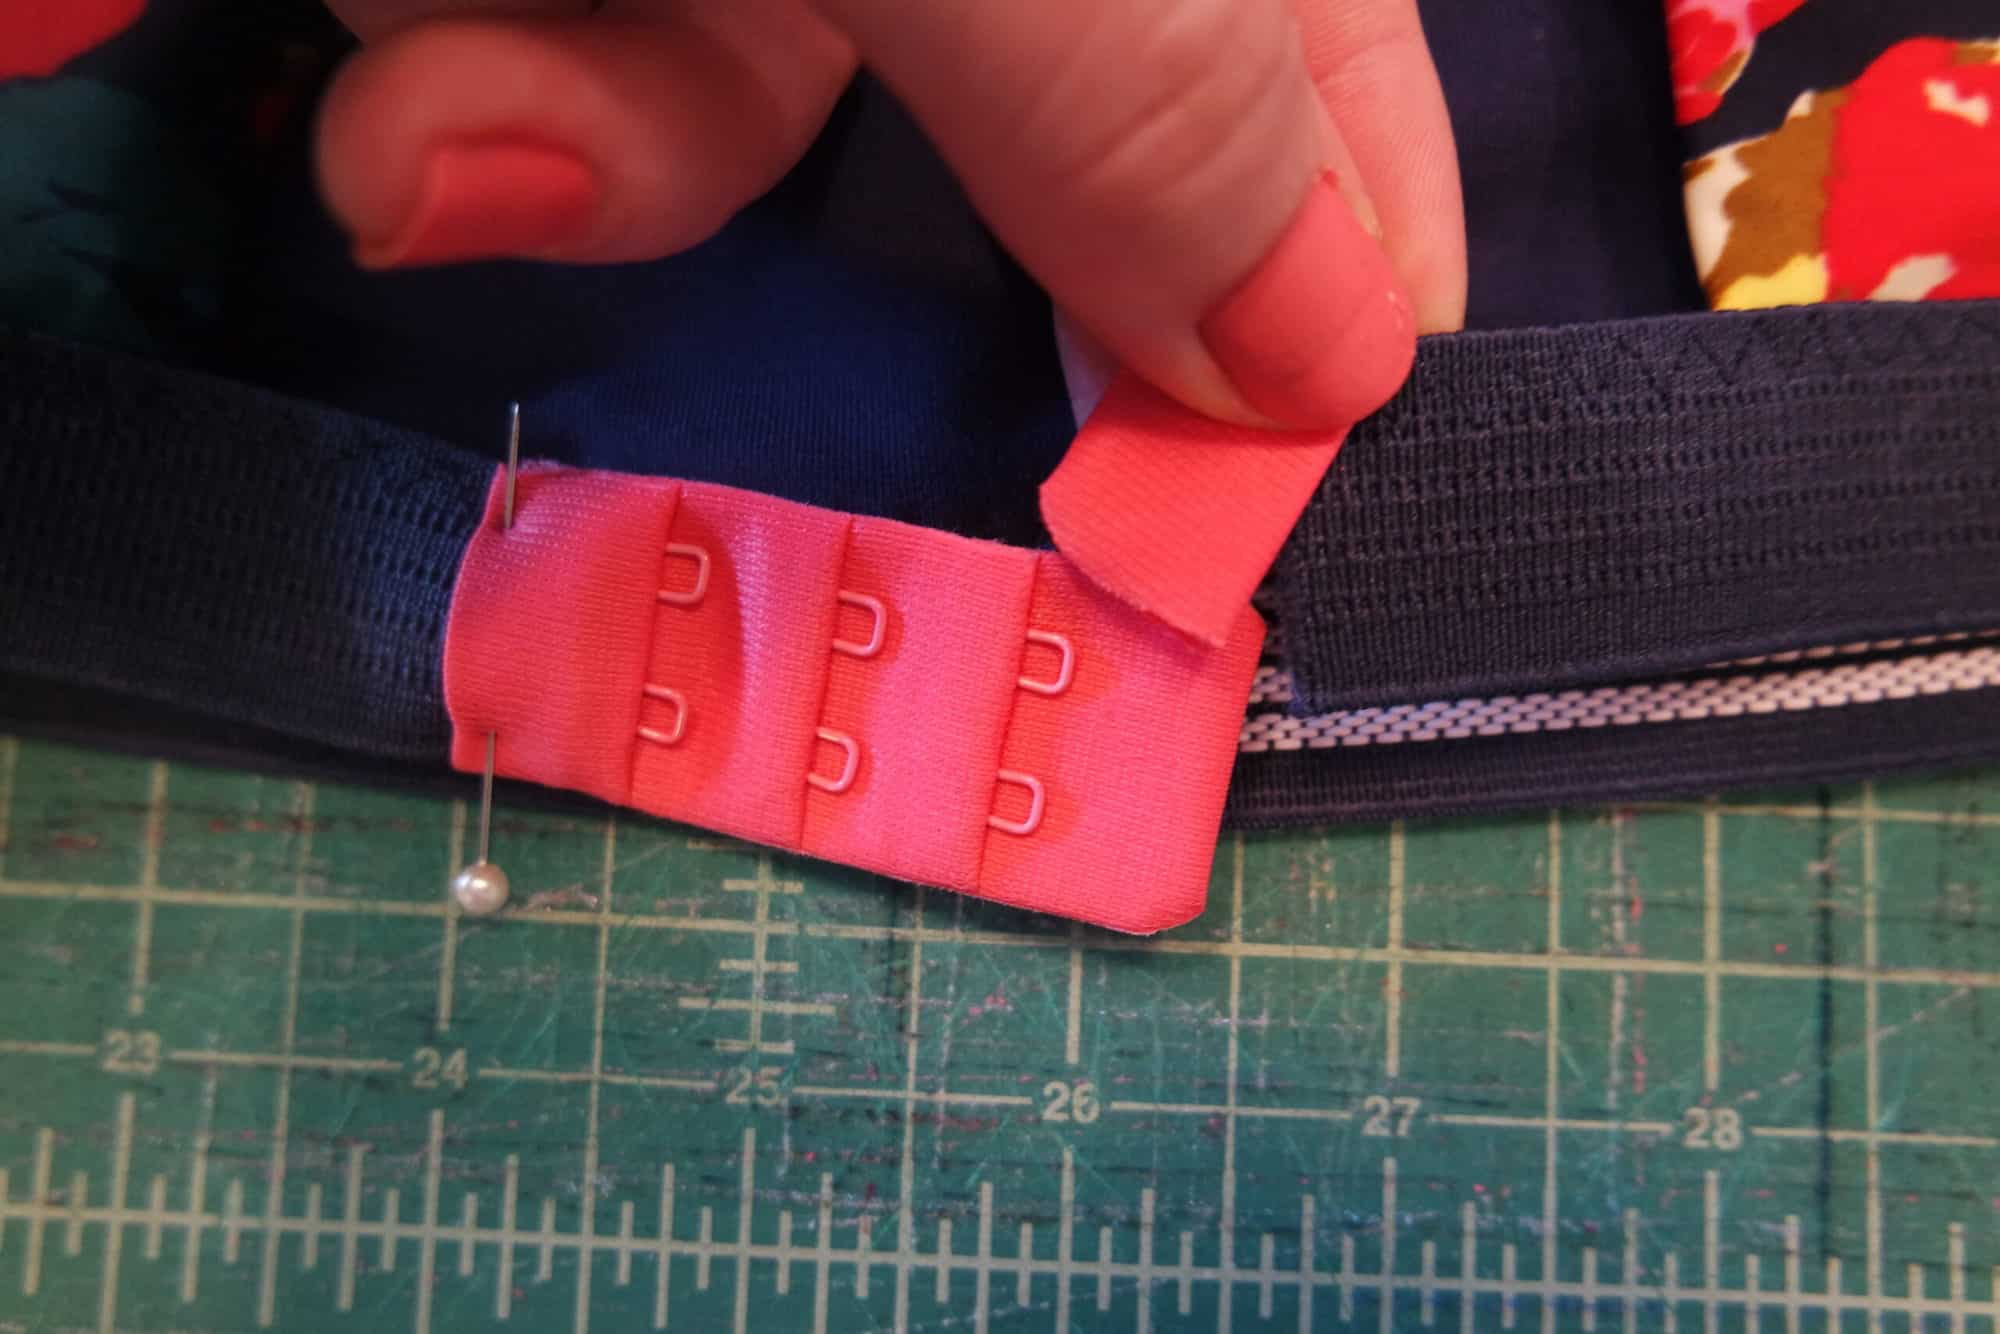 Sewing and Slapdashery: that time I tried to make a sports bra